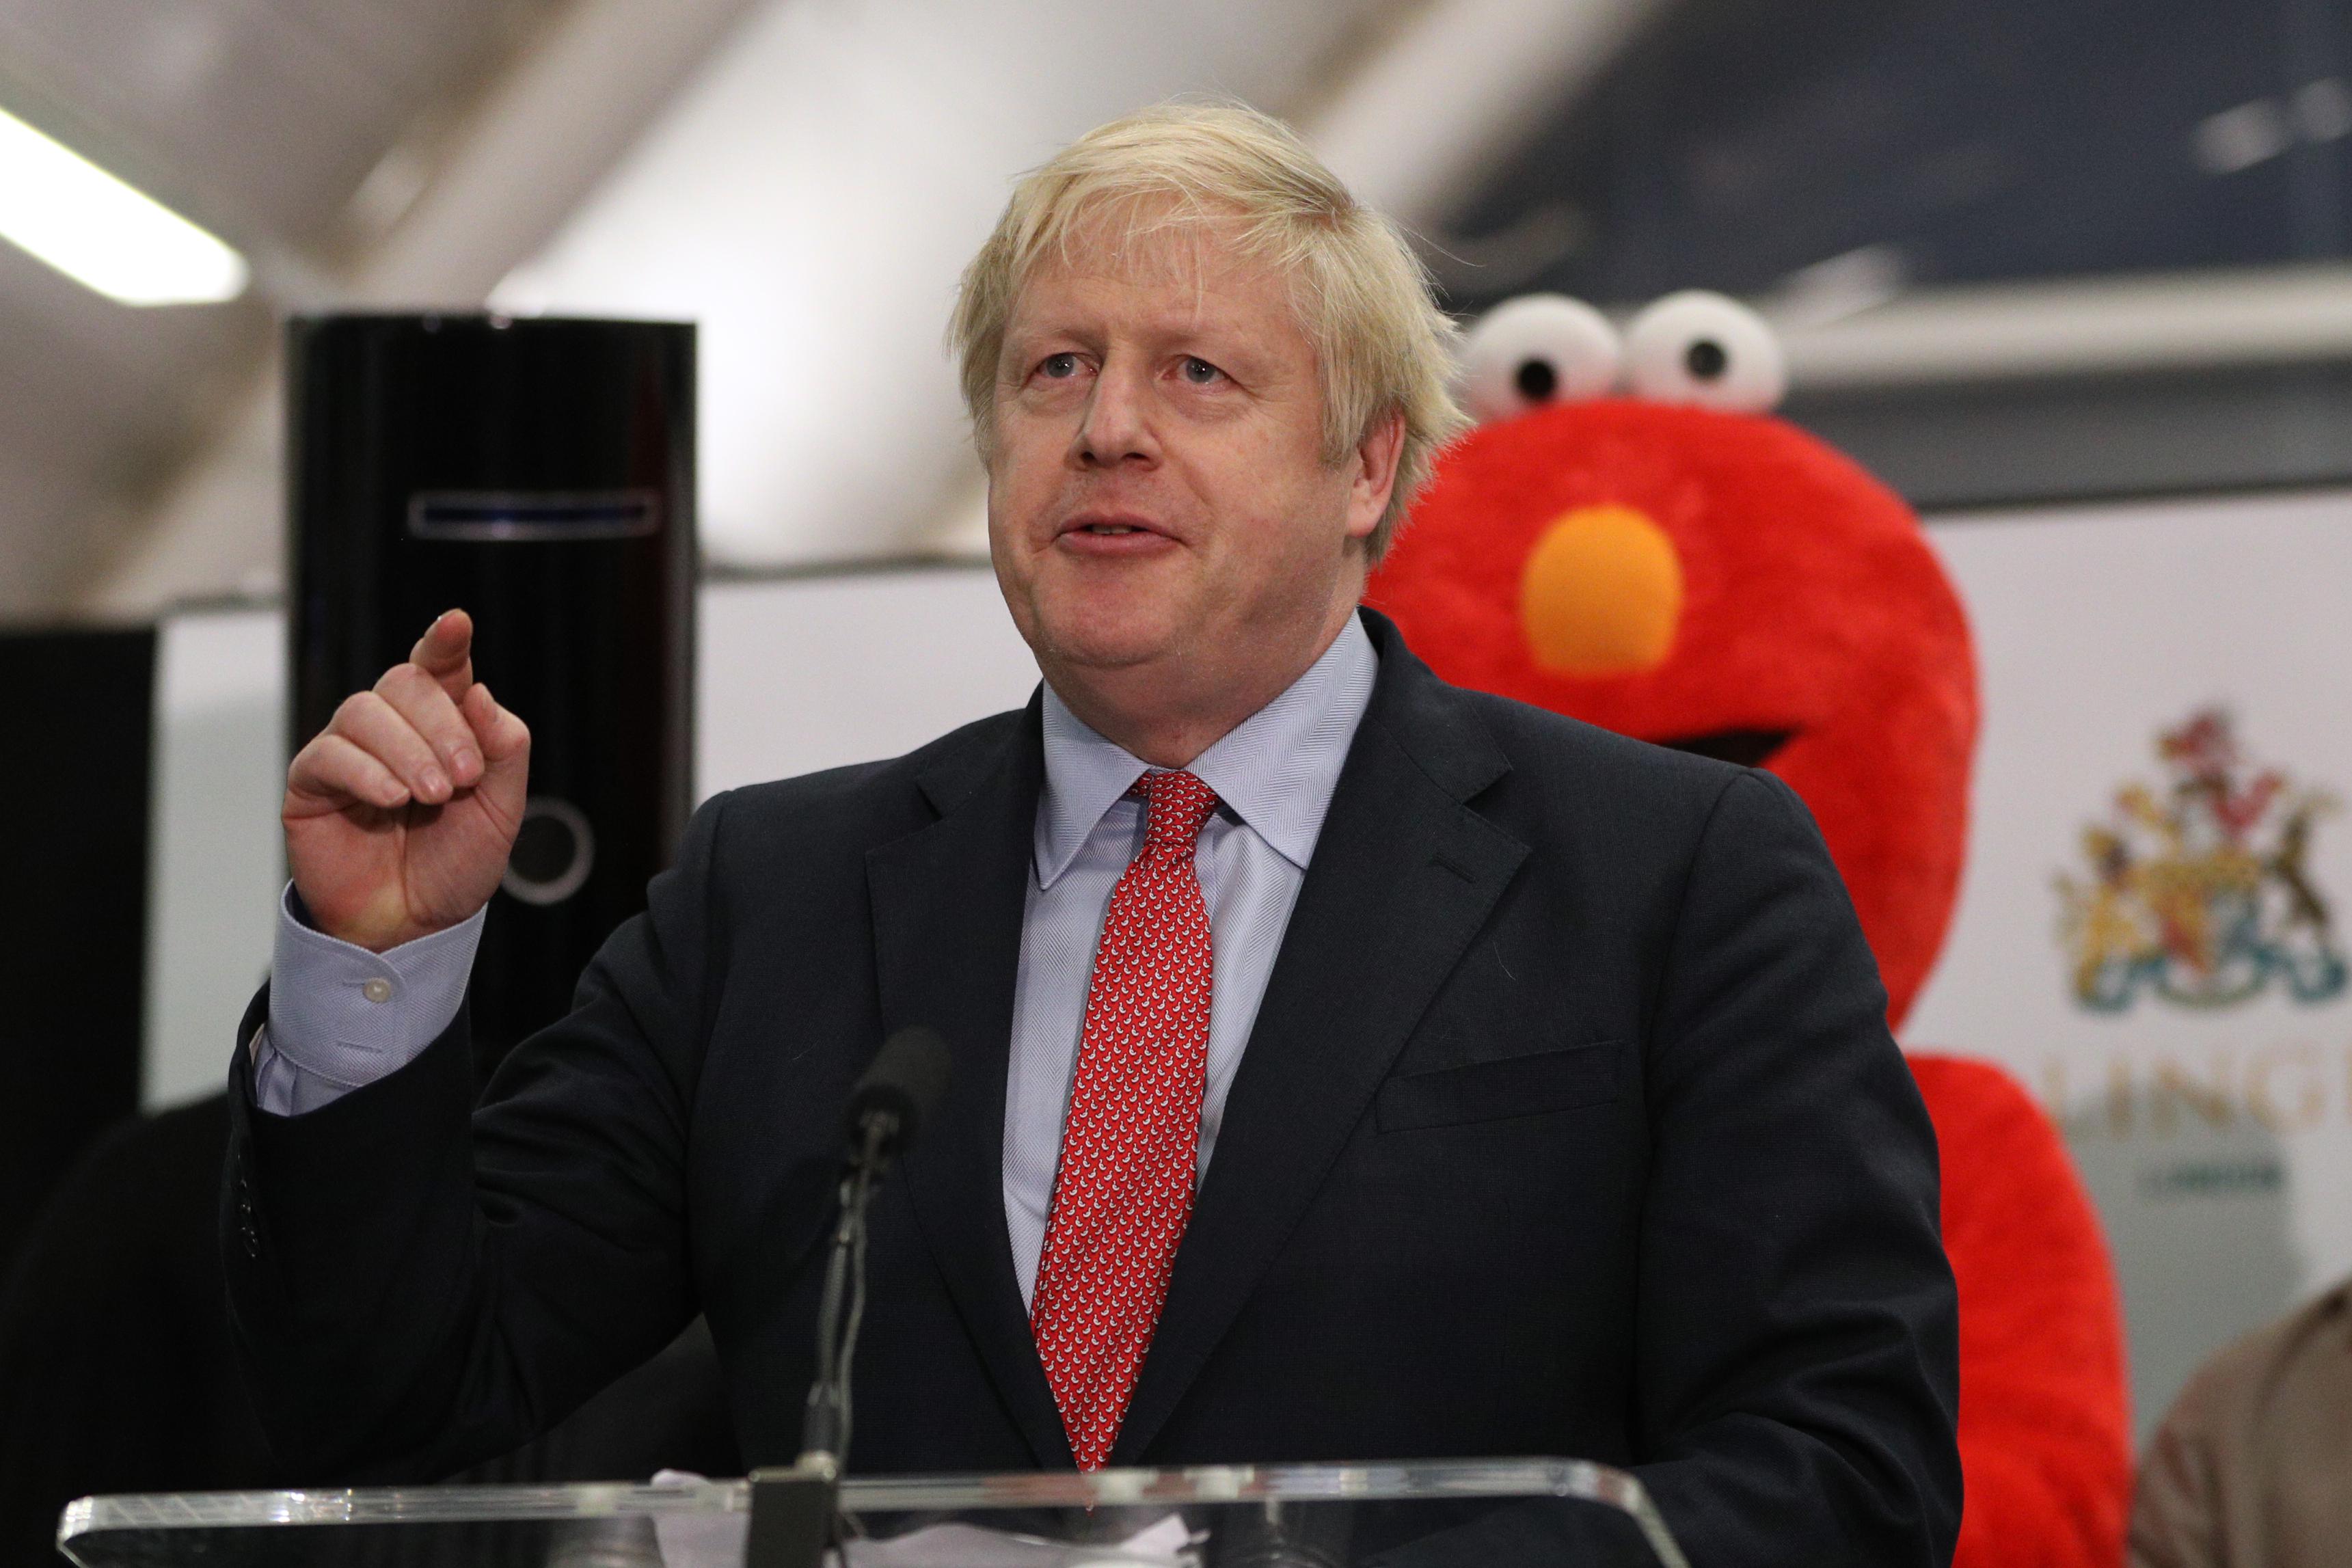 Boris Johnson gives a speech while a fellow candidate dressed as Sesame Street's Elmo stands behind him.